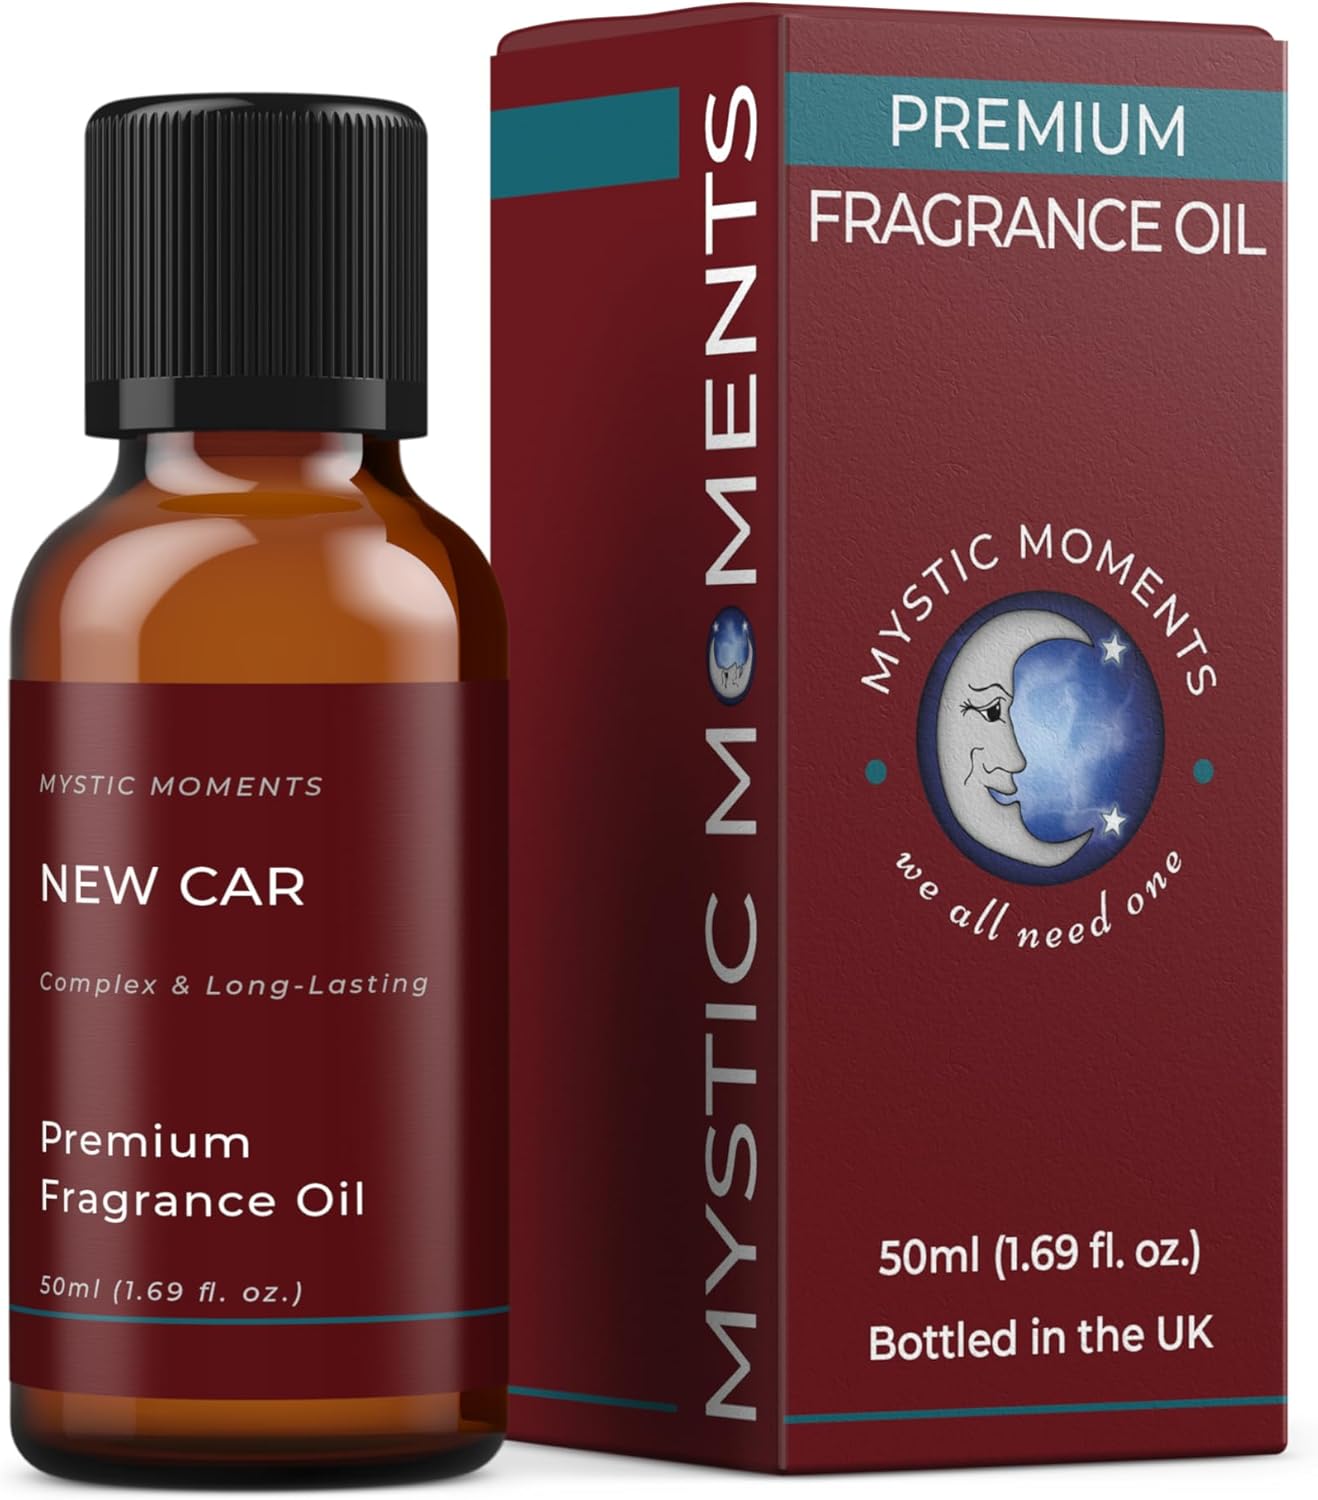 Mystic Moments | New Car Fragrance Oil - 50ml - Perfect for Soaps, Candles, Bath Bombs, Oil Burners, Diffusers and Skin & Hair Care Items